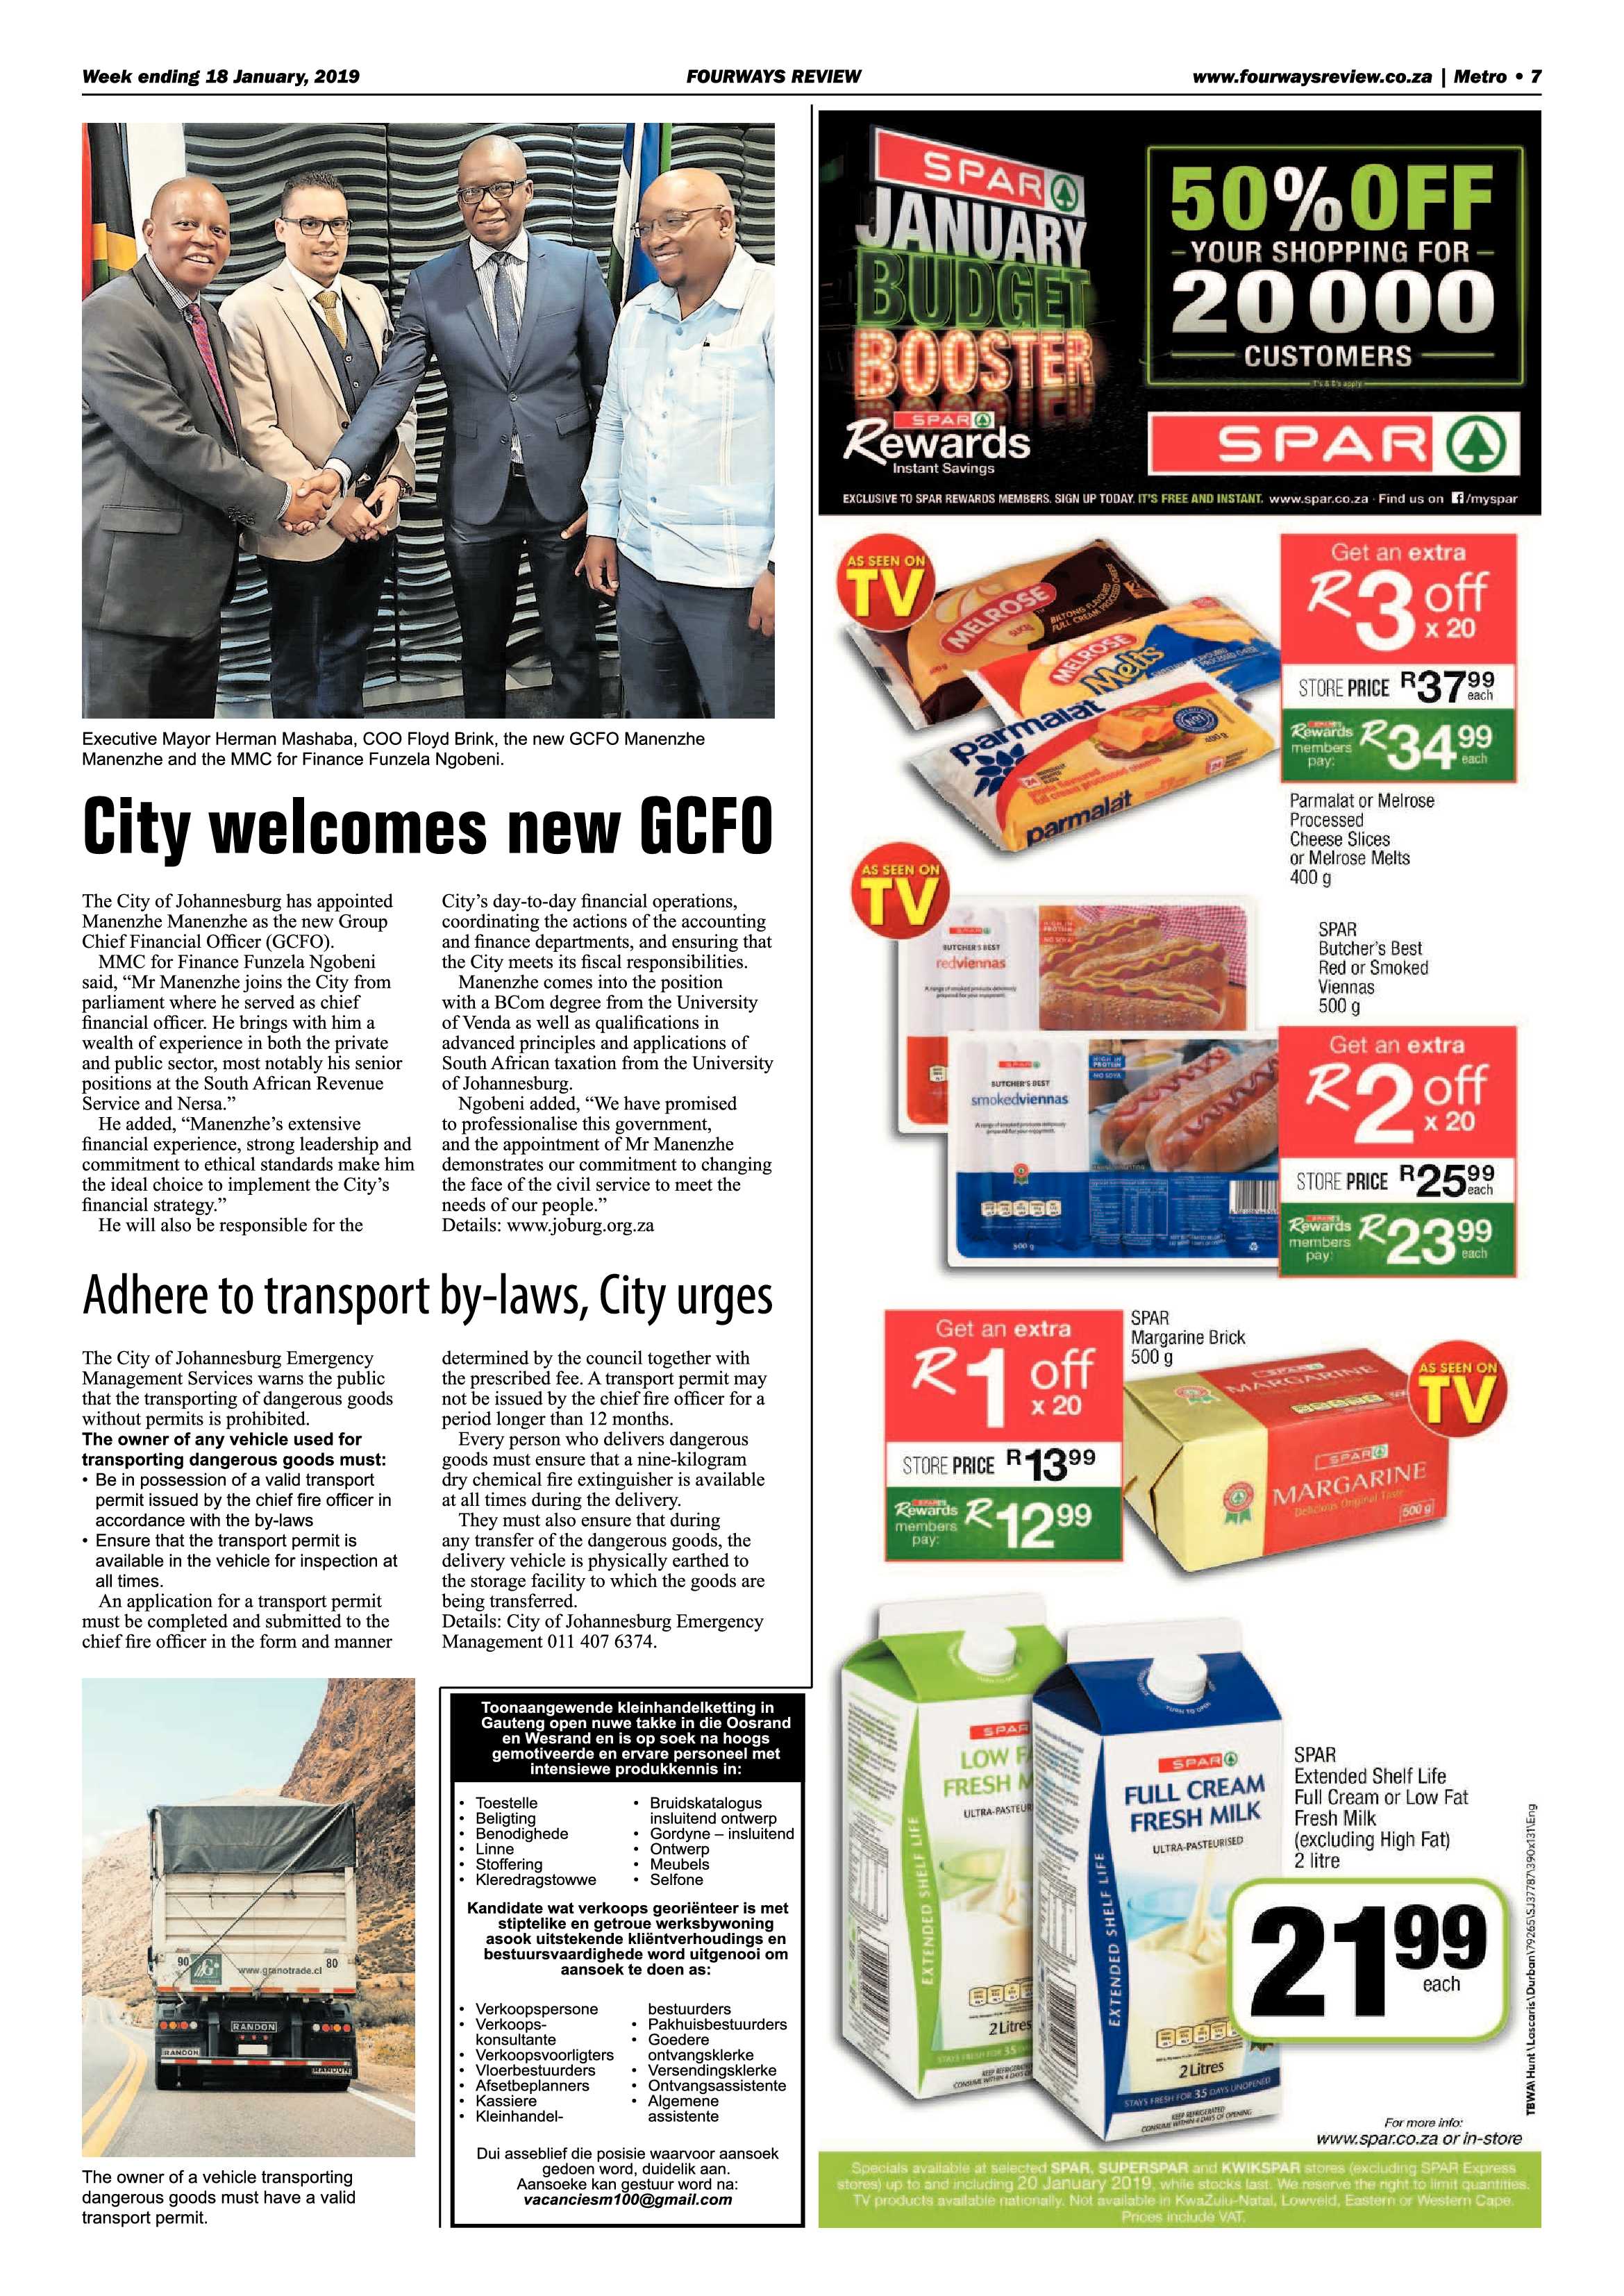 Fourways Review 18 January, 2019 page 7